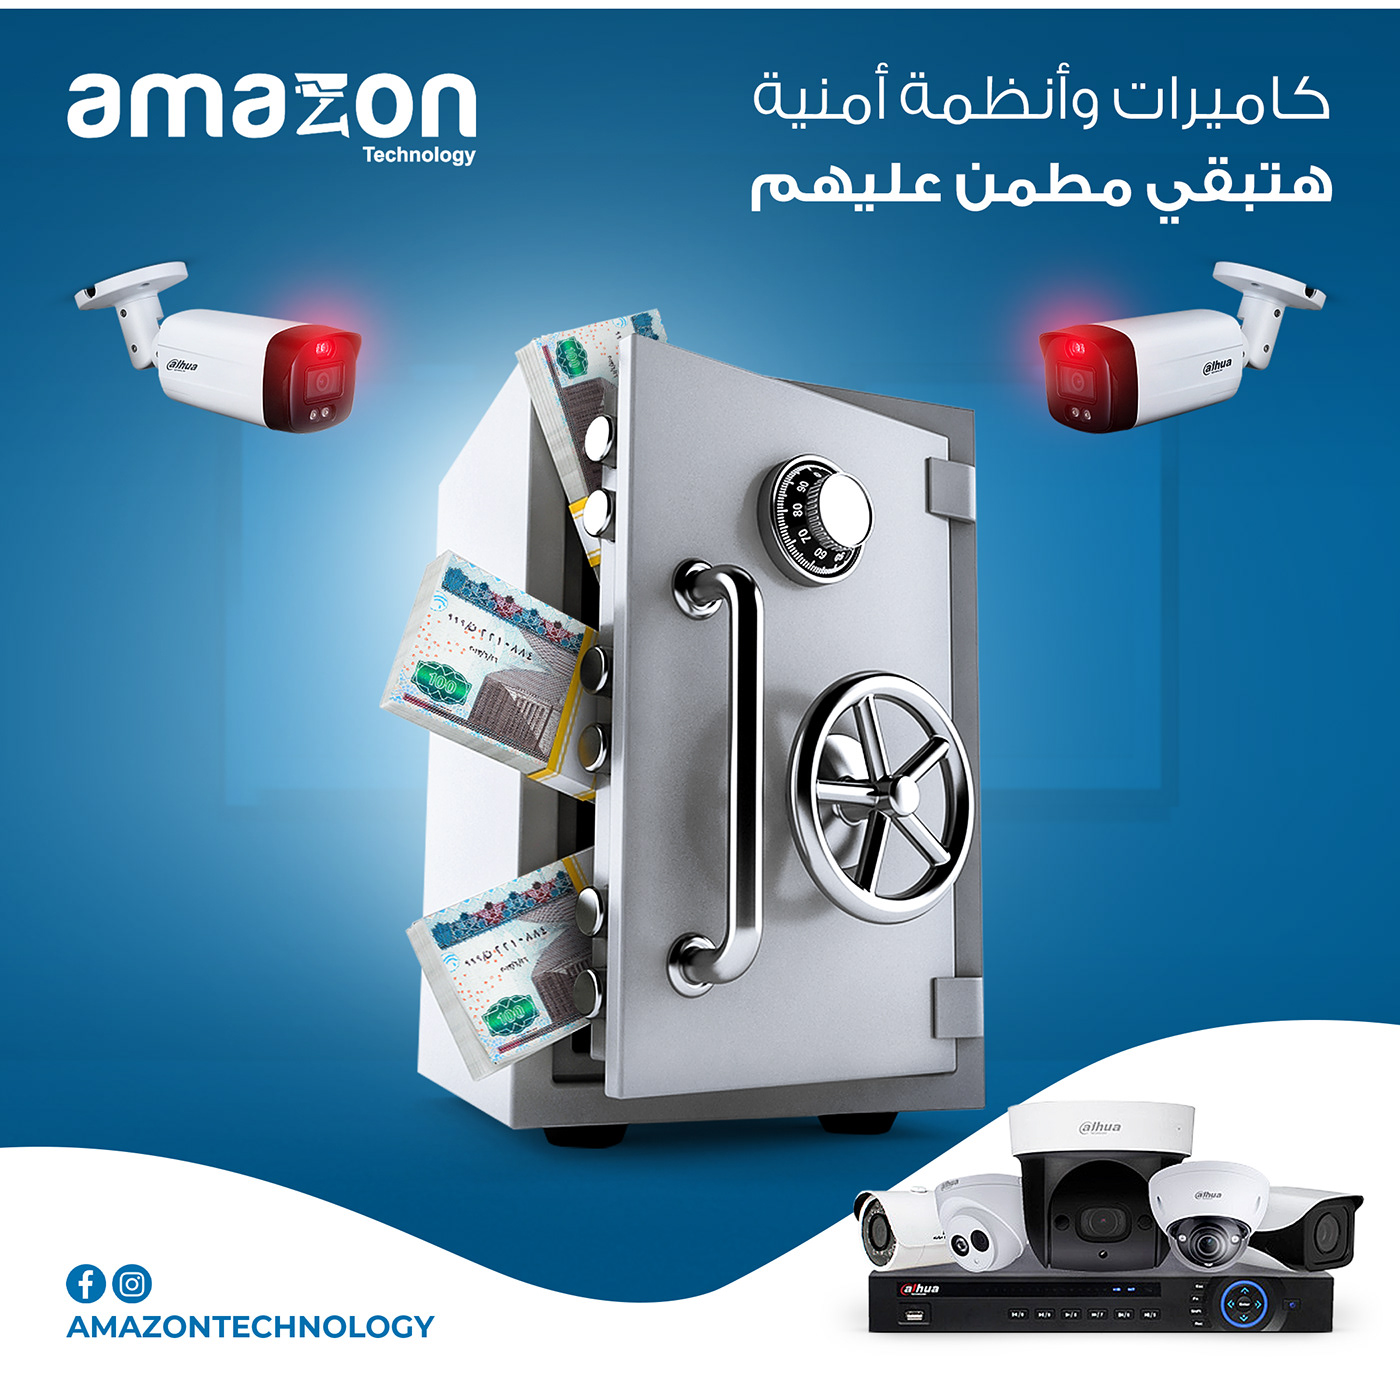 ads Advertising  Amazon campaign security Technology